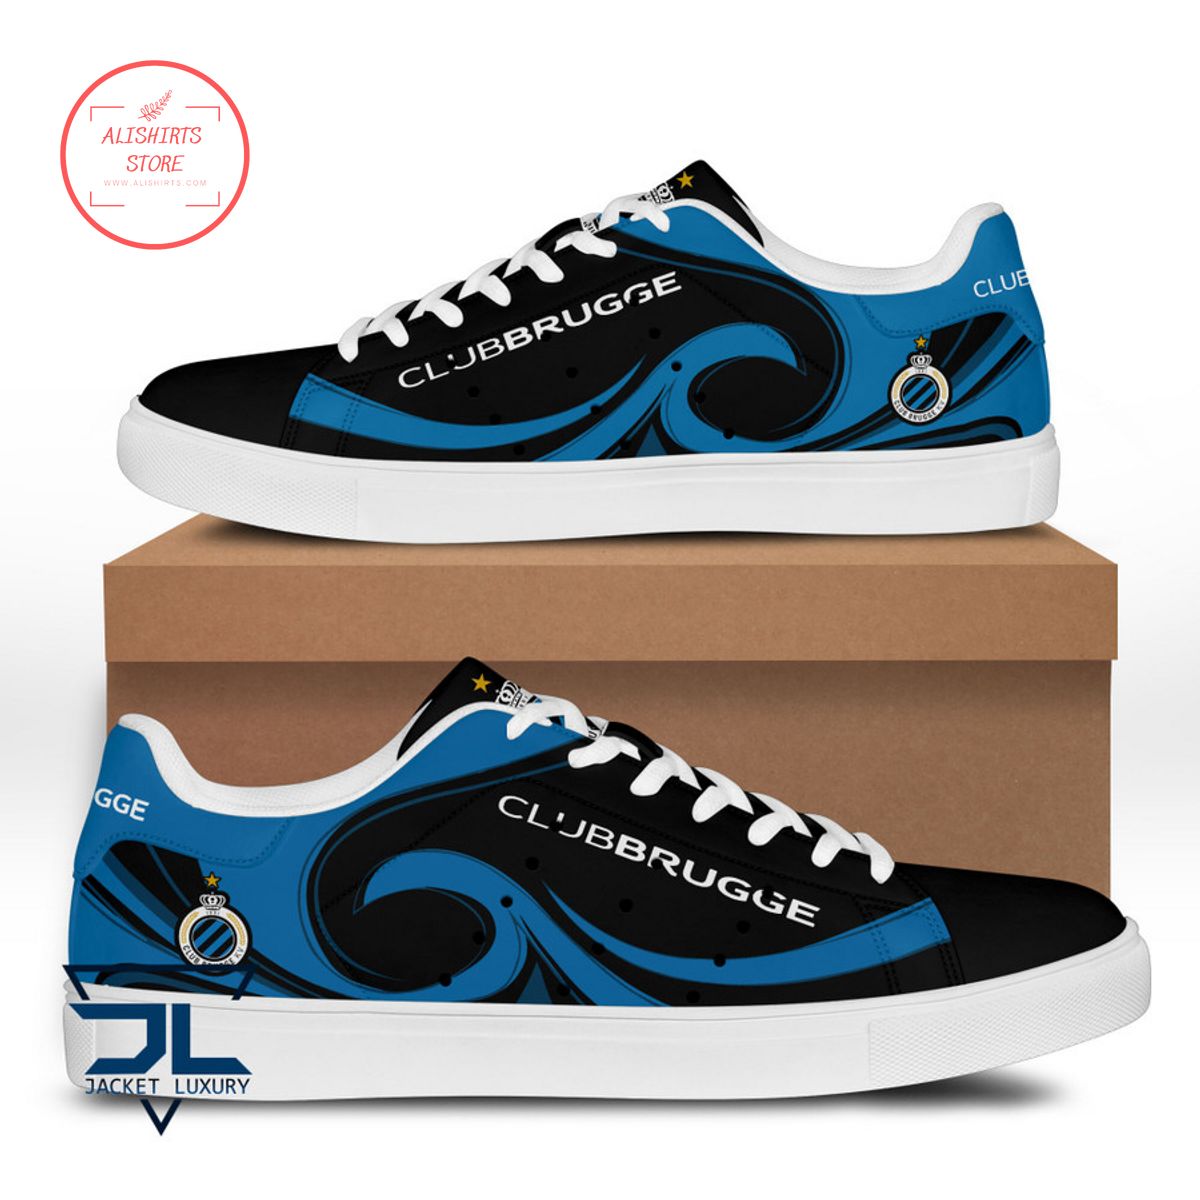 Club Brugge Stan Smith Shoes